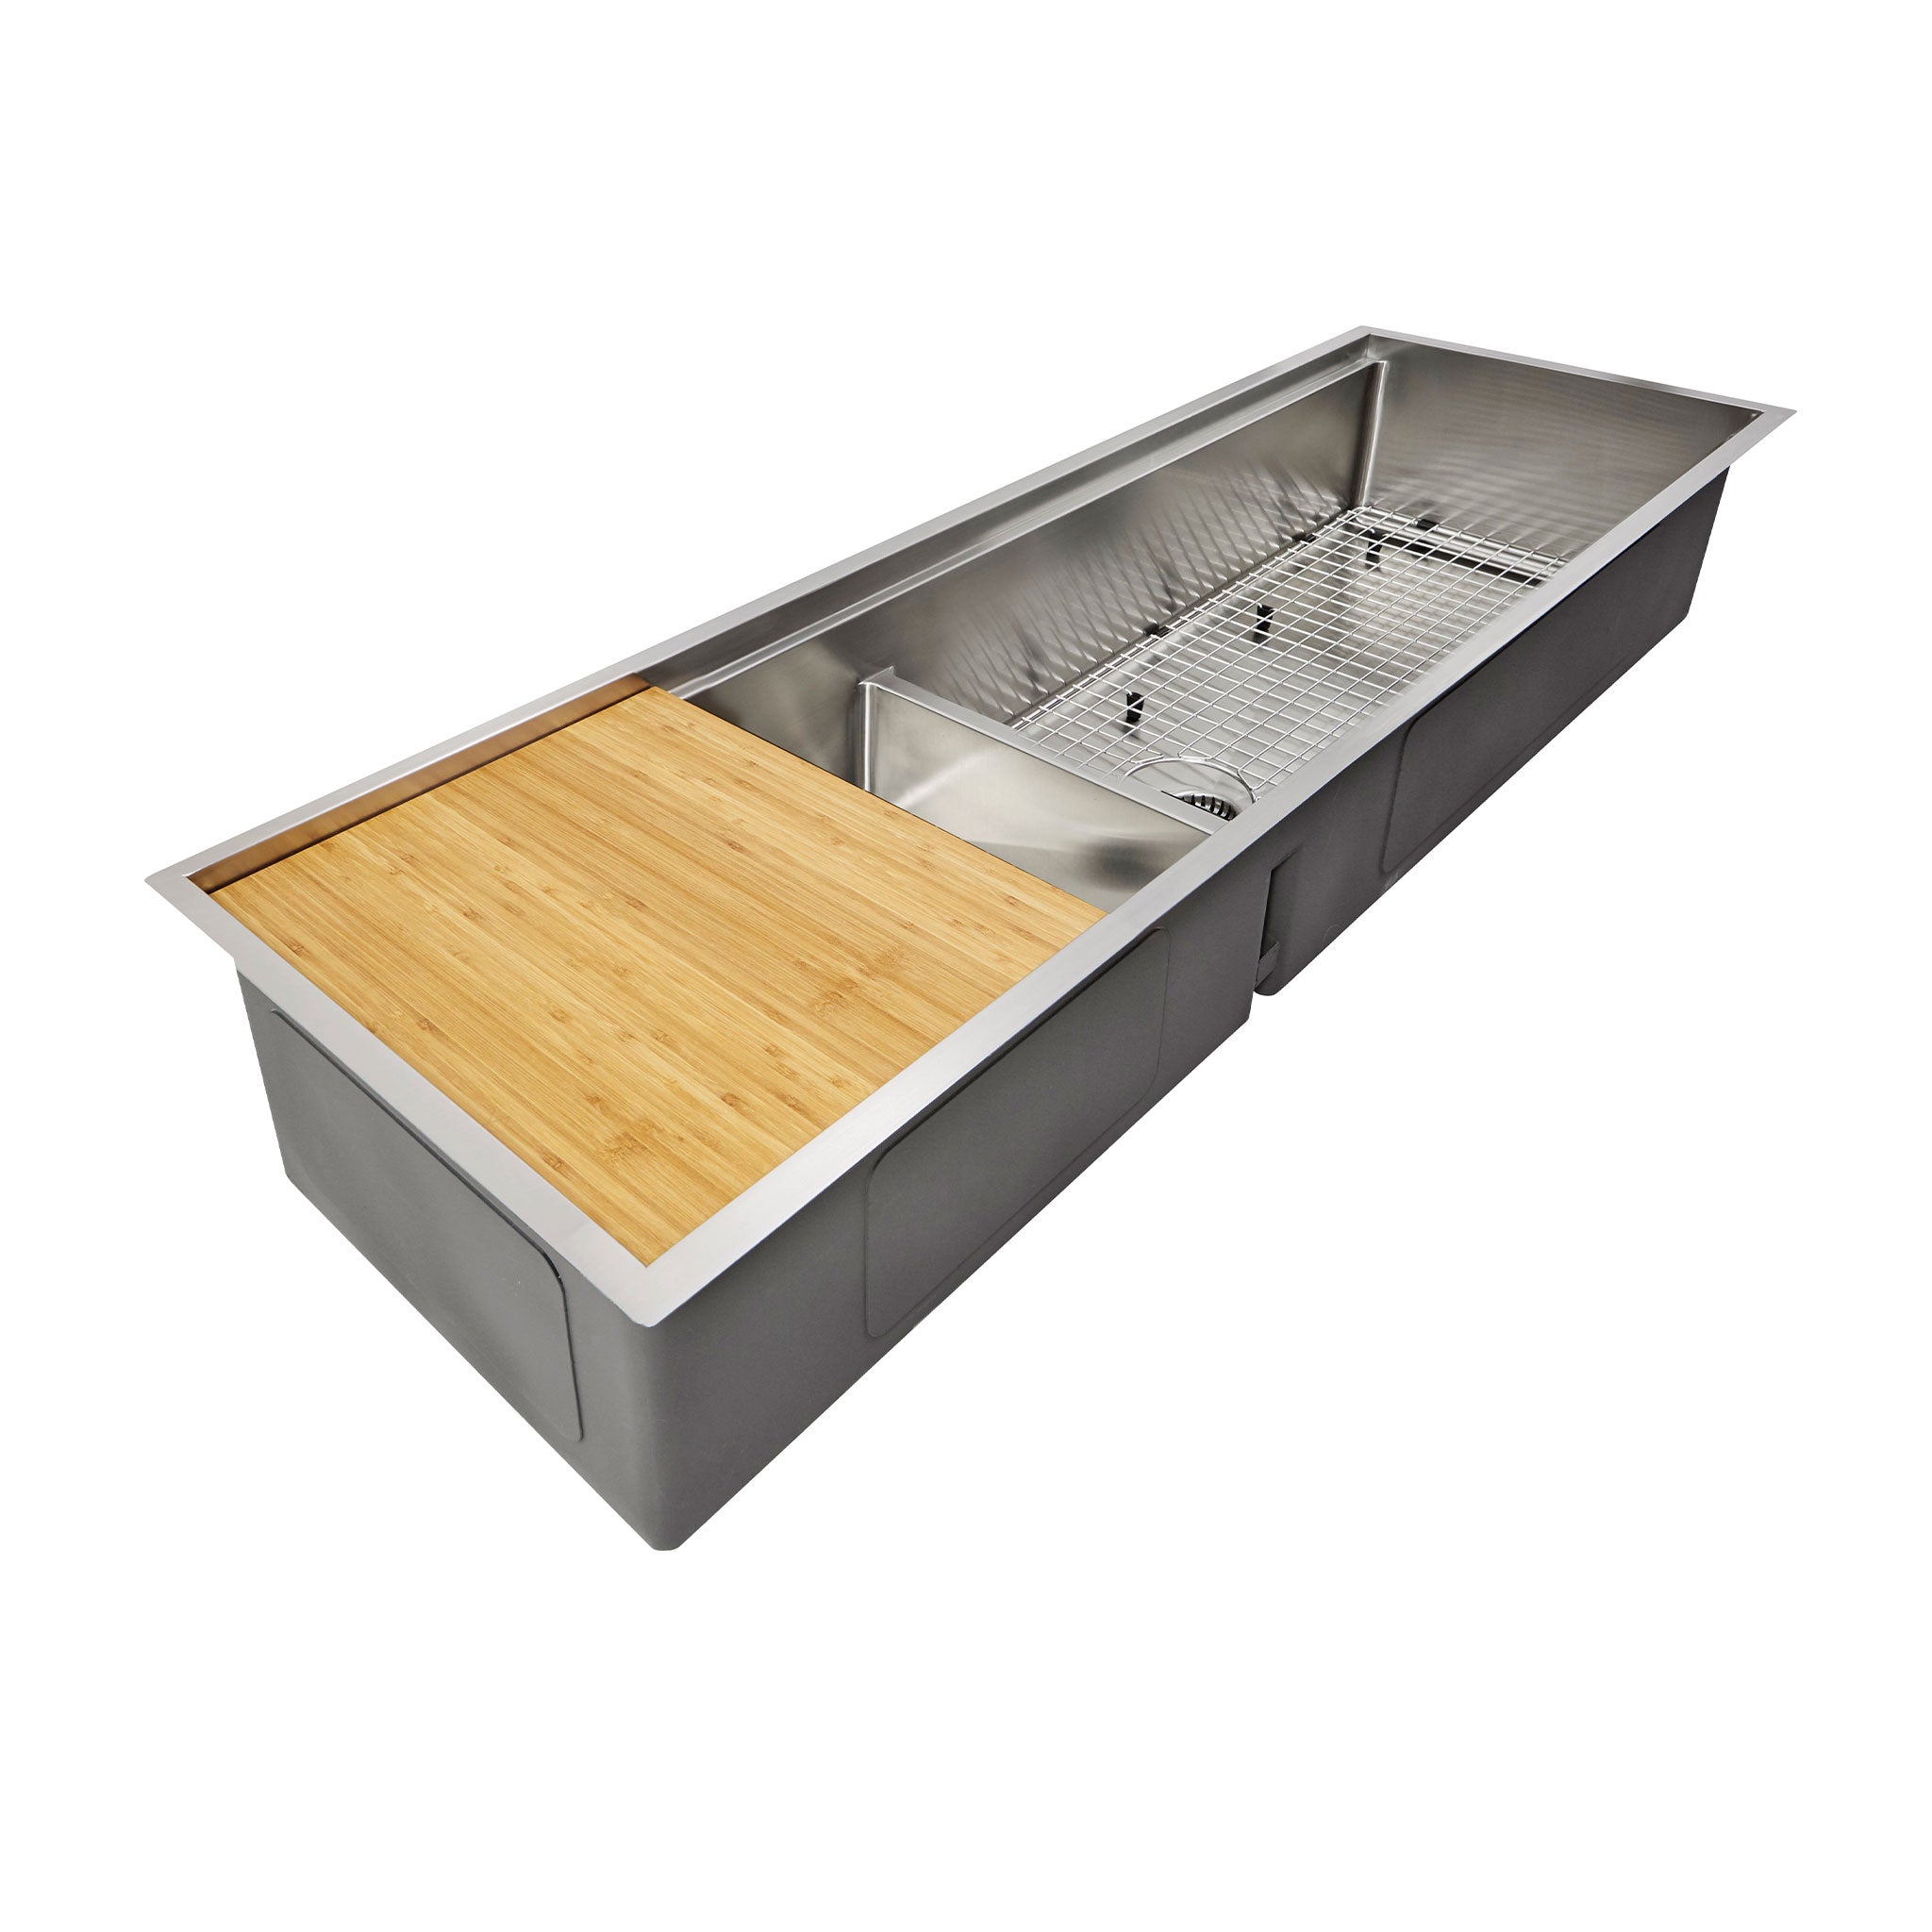 Oversized Double bowl undermount kitchen sink with smart low divide.